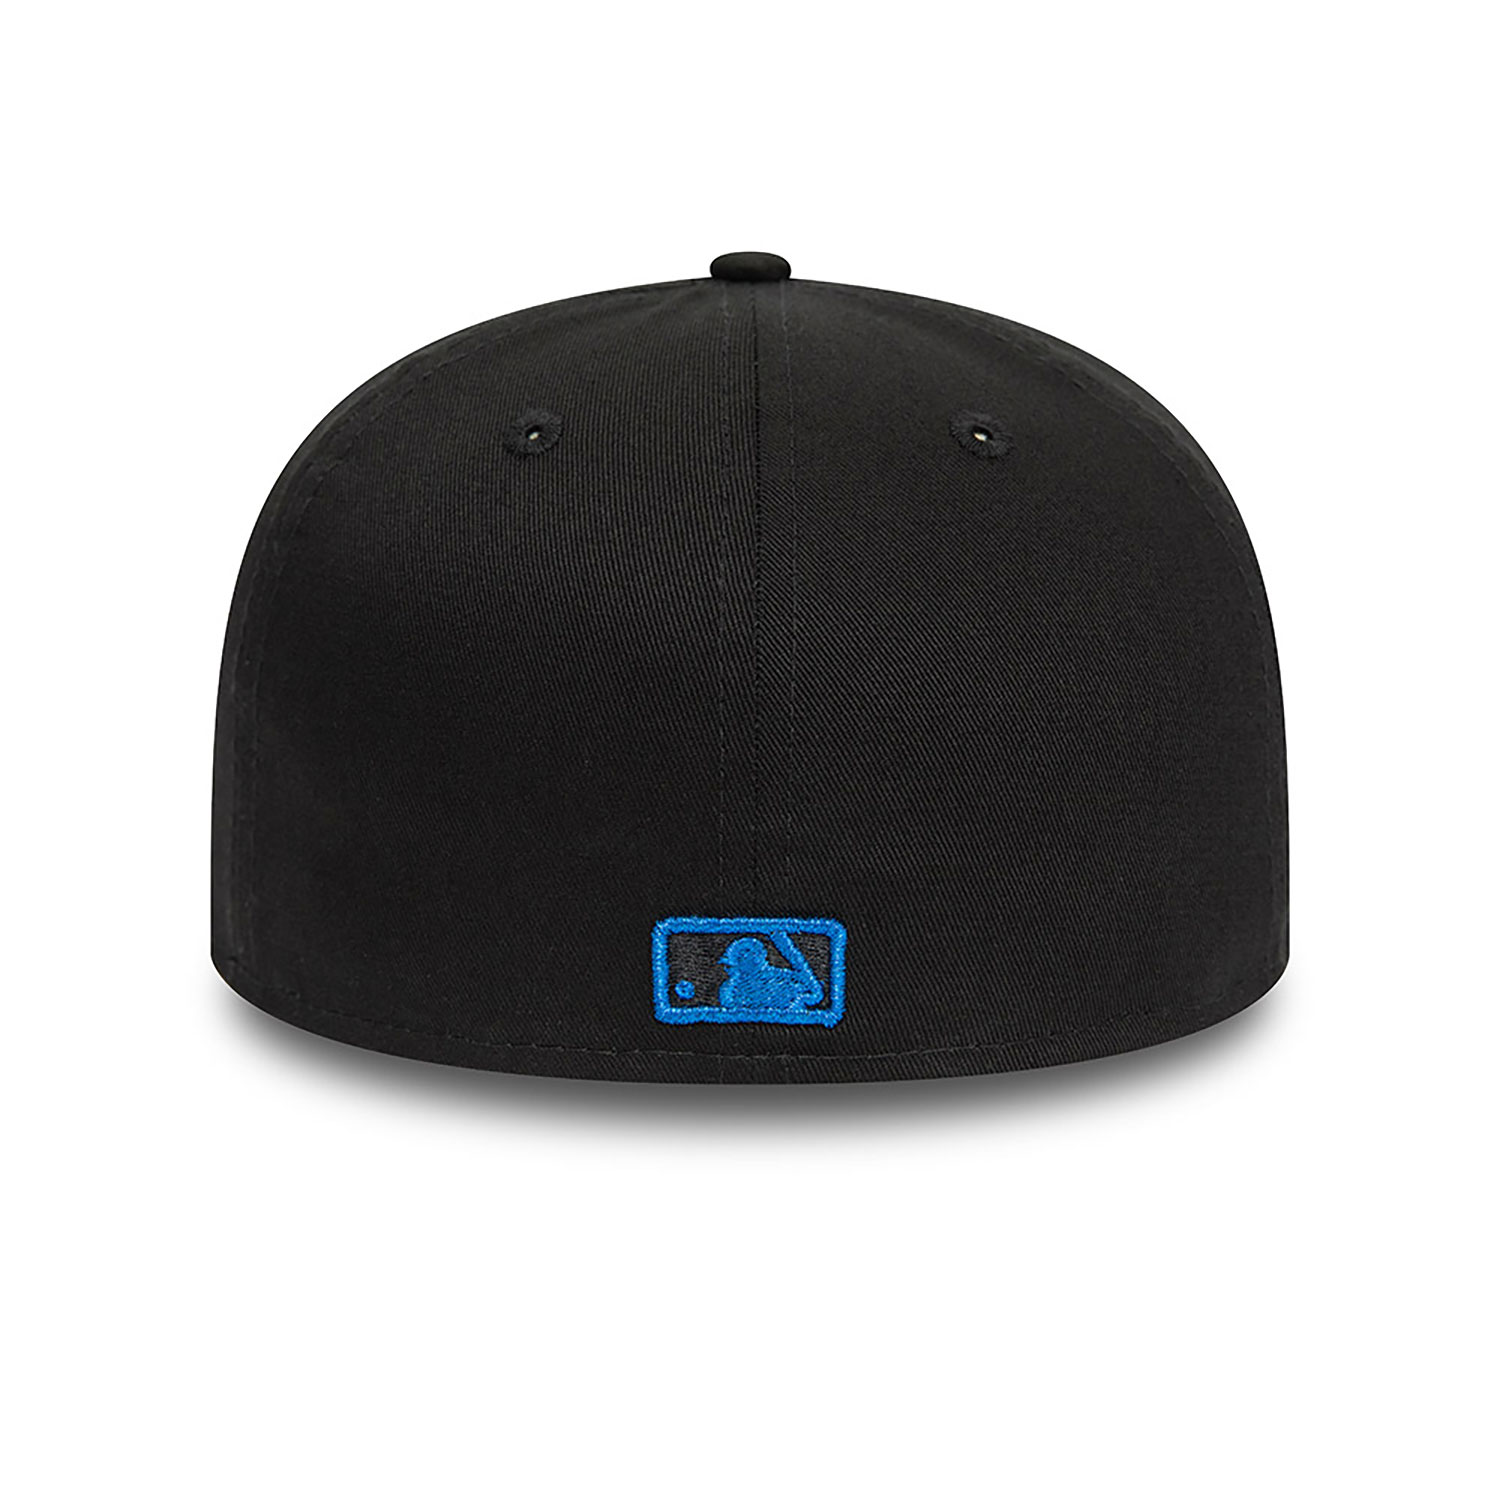 New York Yankees Metallic Outline Black 59FIFTY Fitted Cap